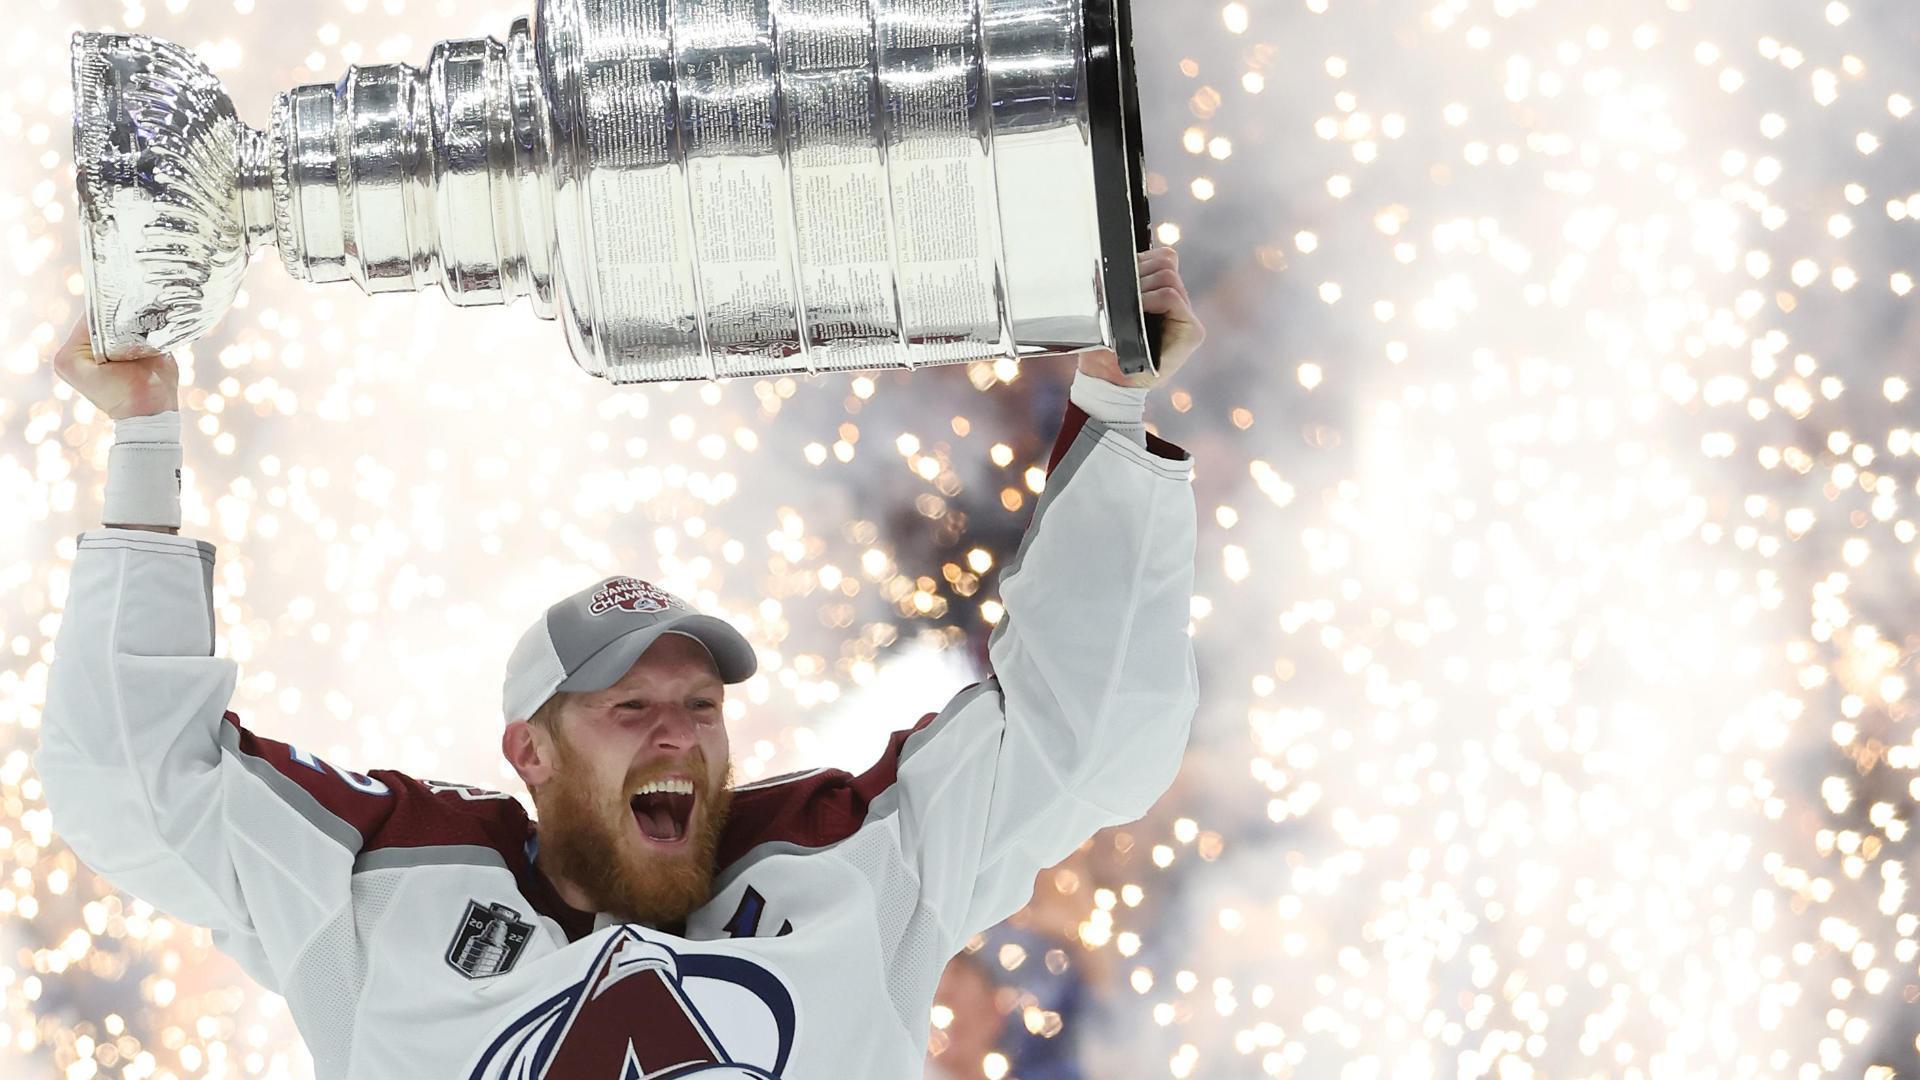 Avalanche vs. Lightning score Stanley Cup Final Game 6: Colorado wins 2-1  for team's third championship 